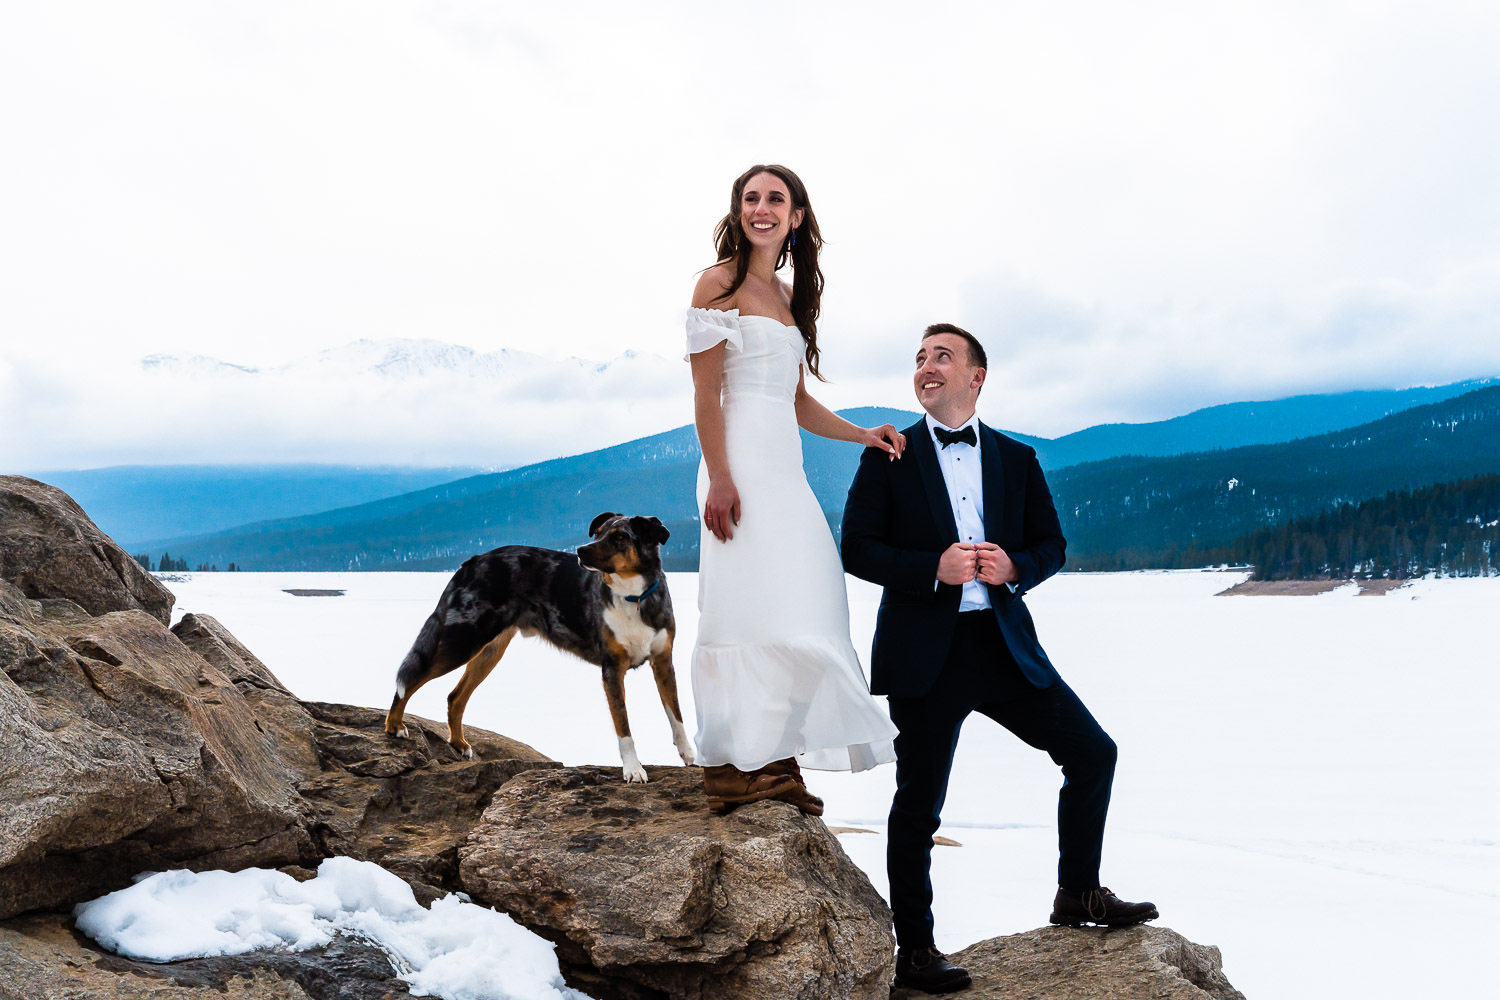 newlyweds on boulders during their snowy winter elopement